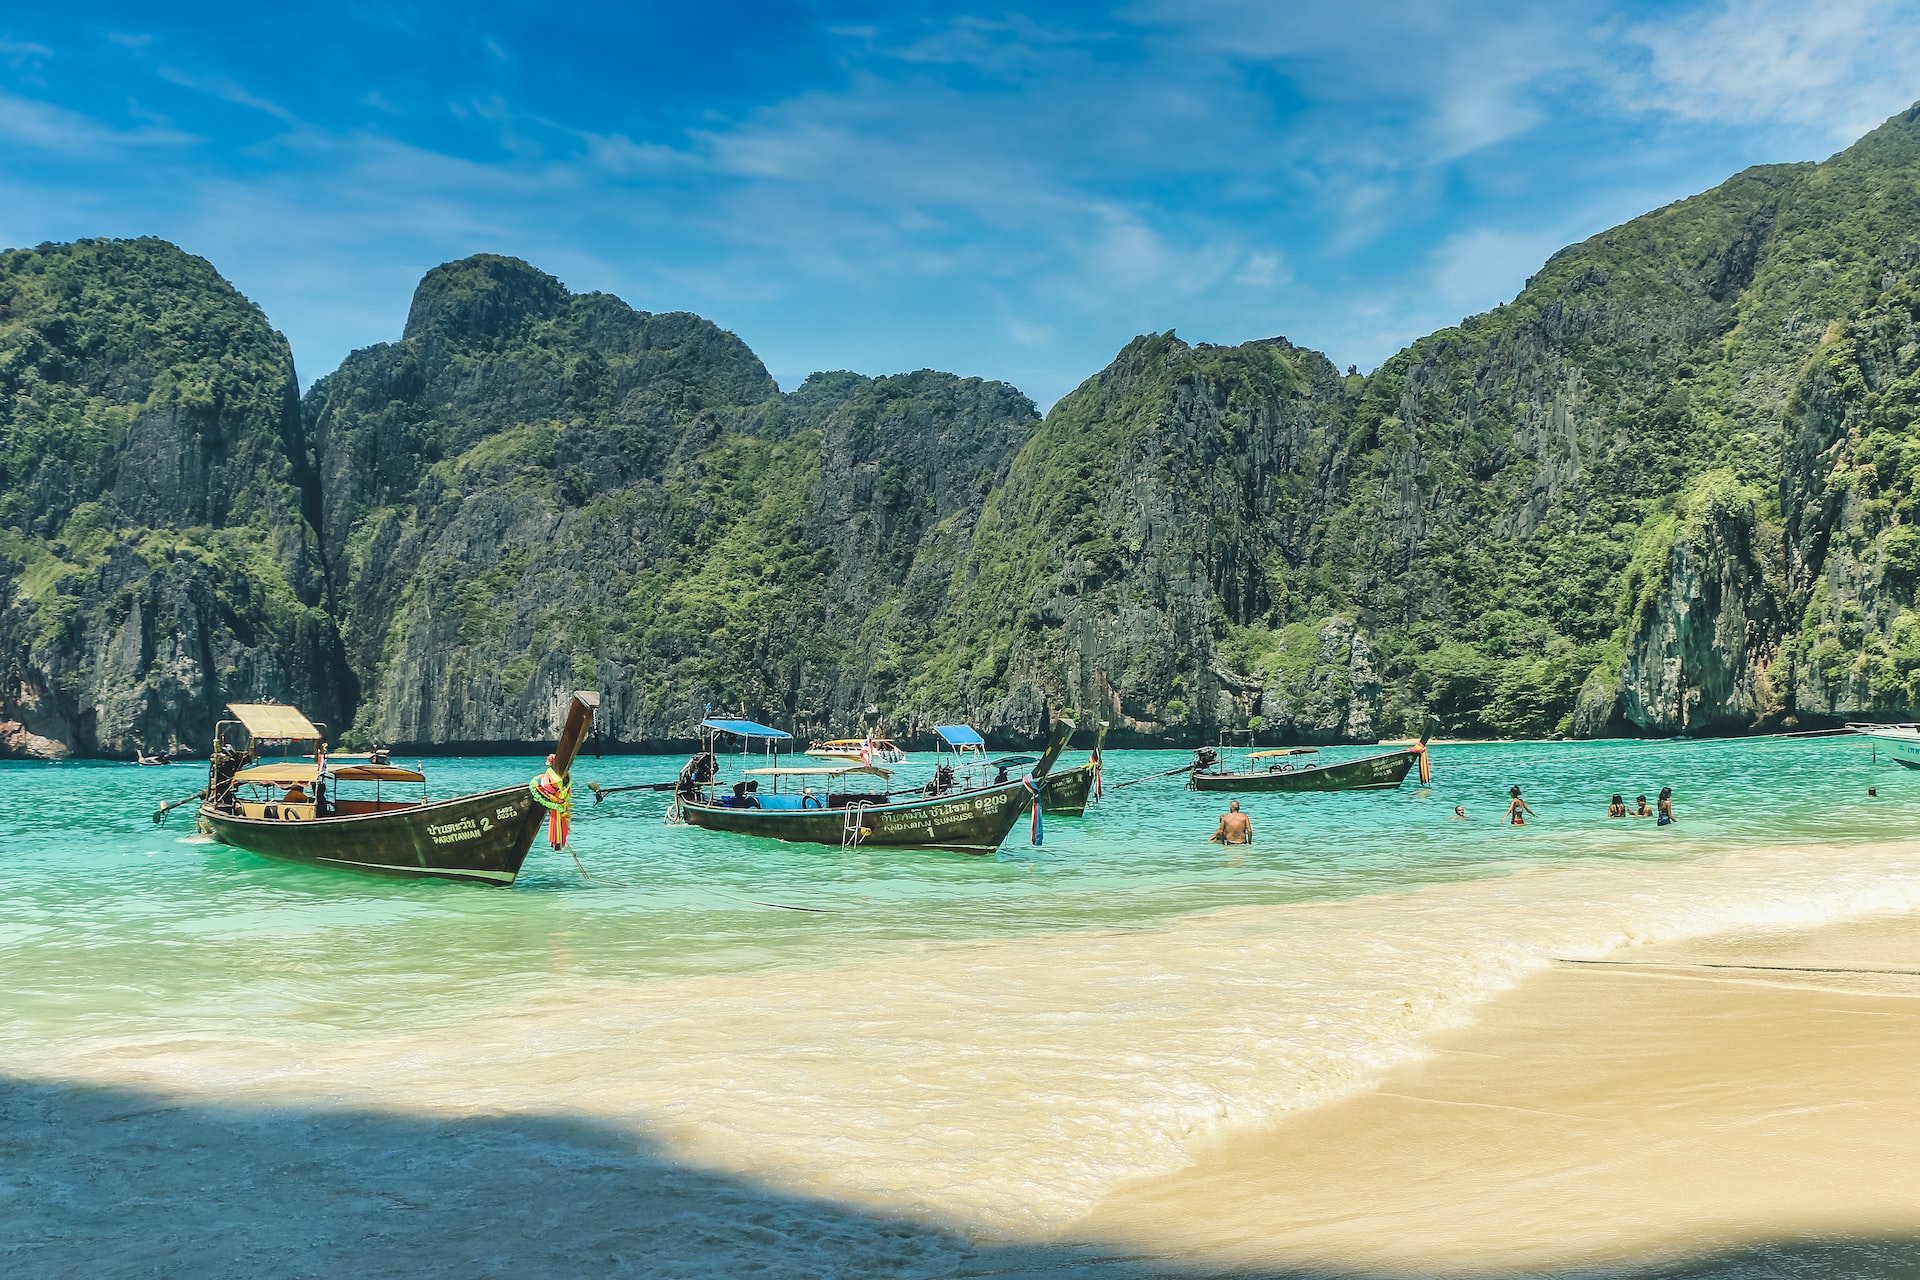 Thailand travel guide